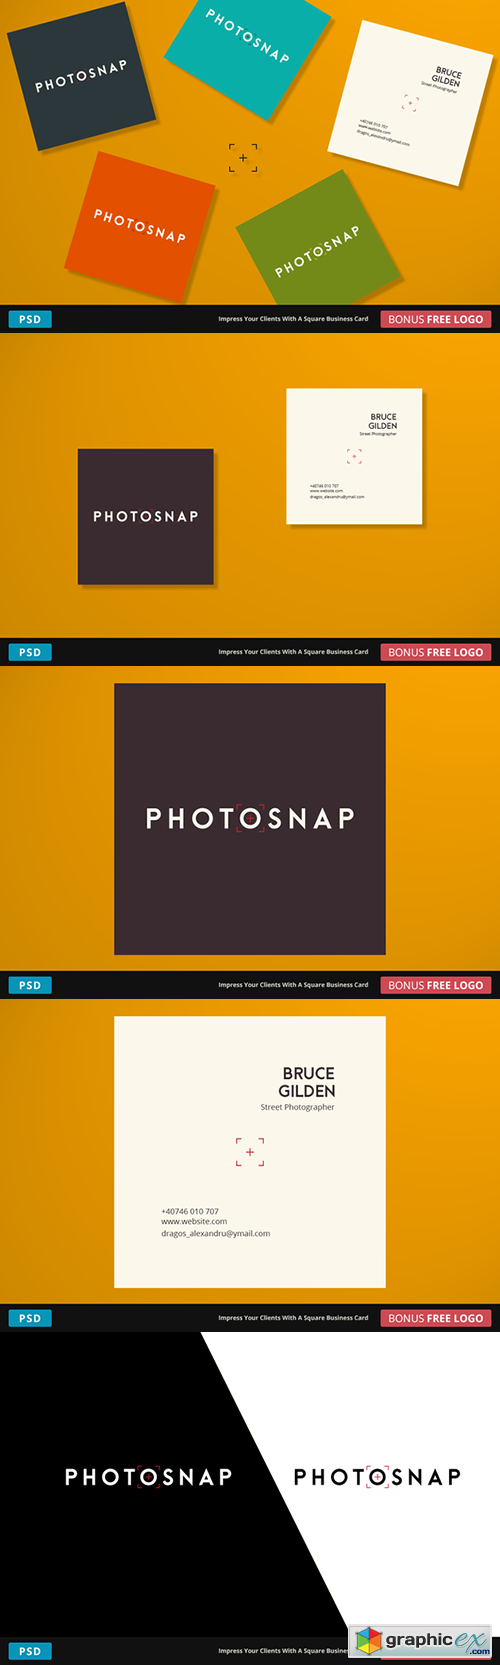 PhotoSnap Business Card - Square